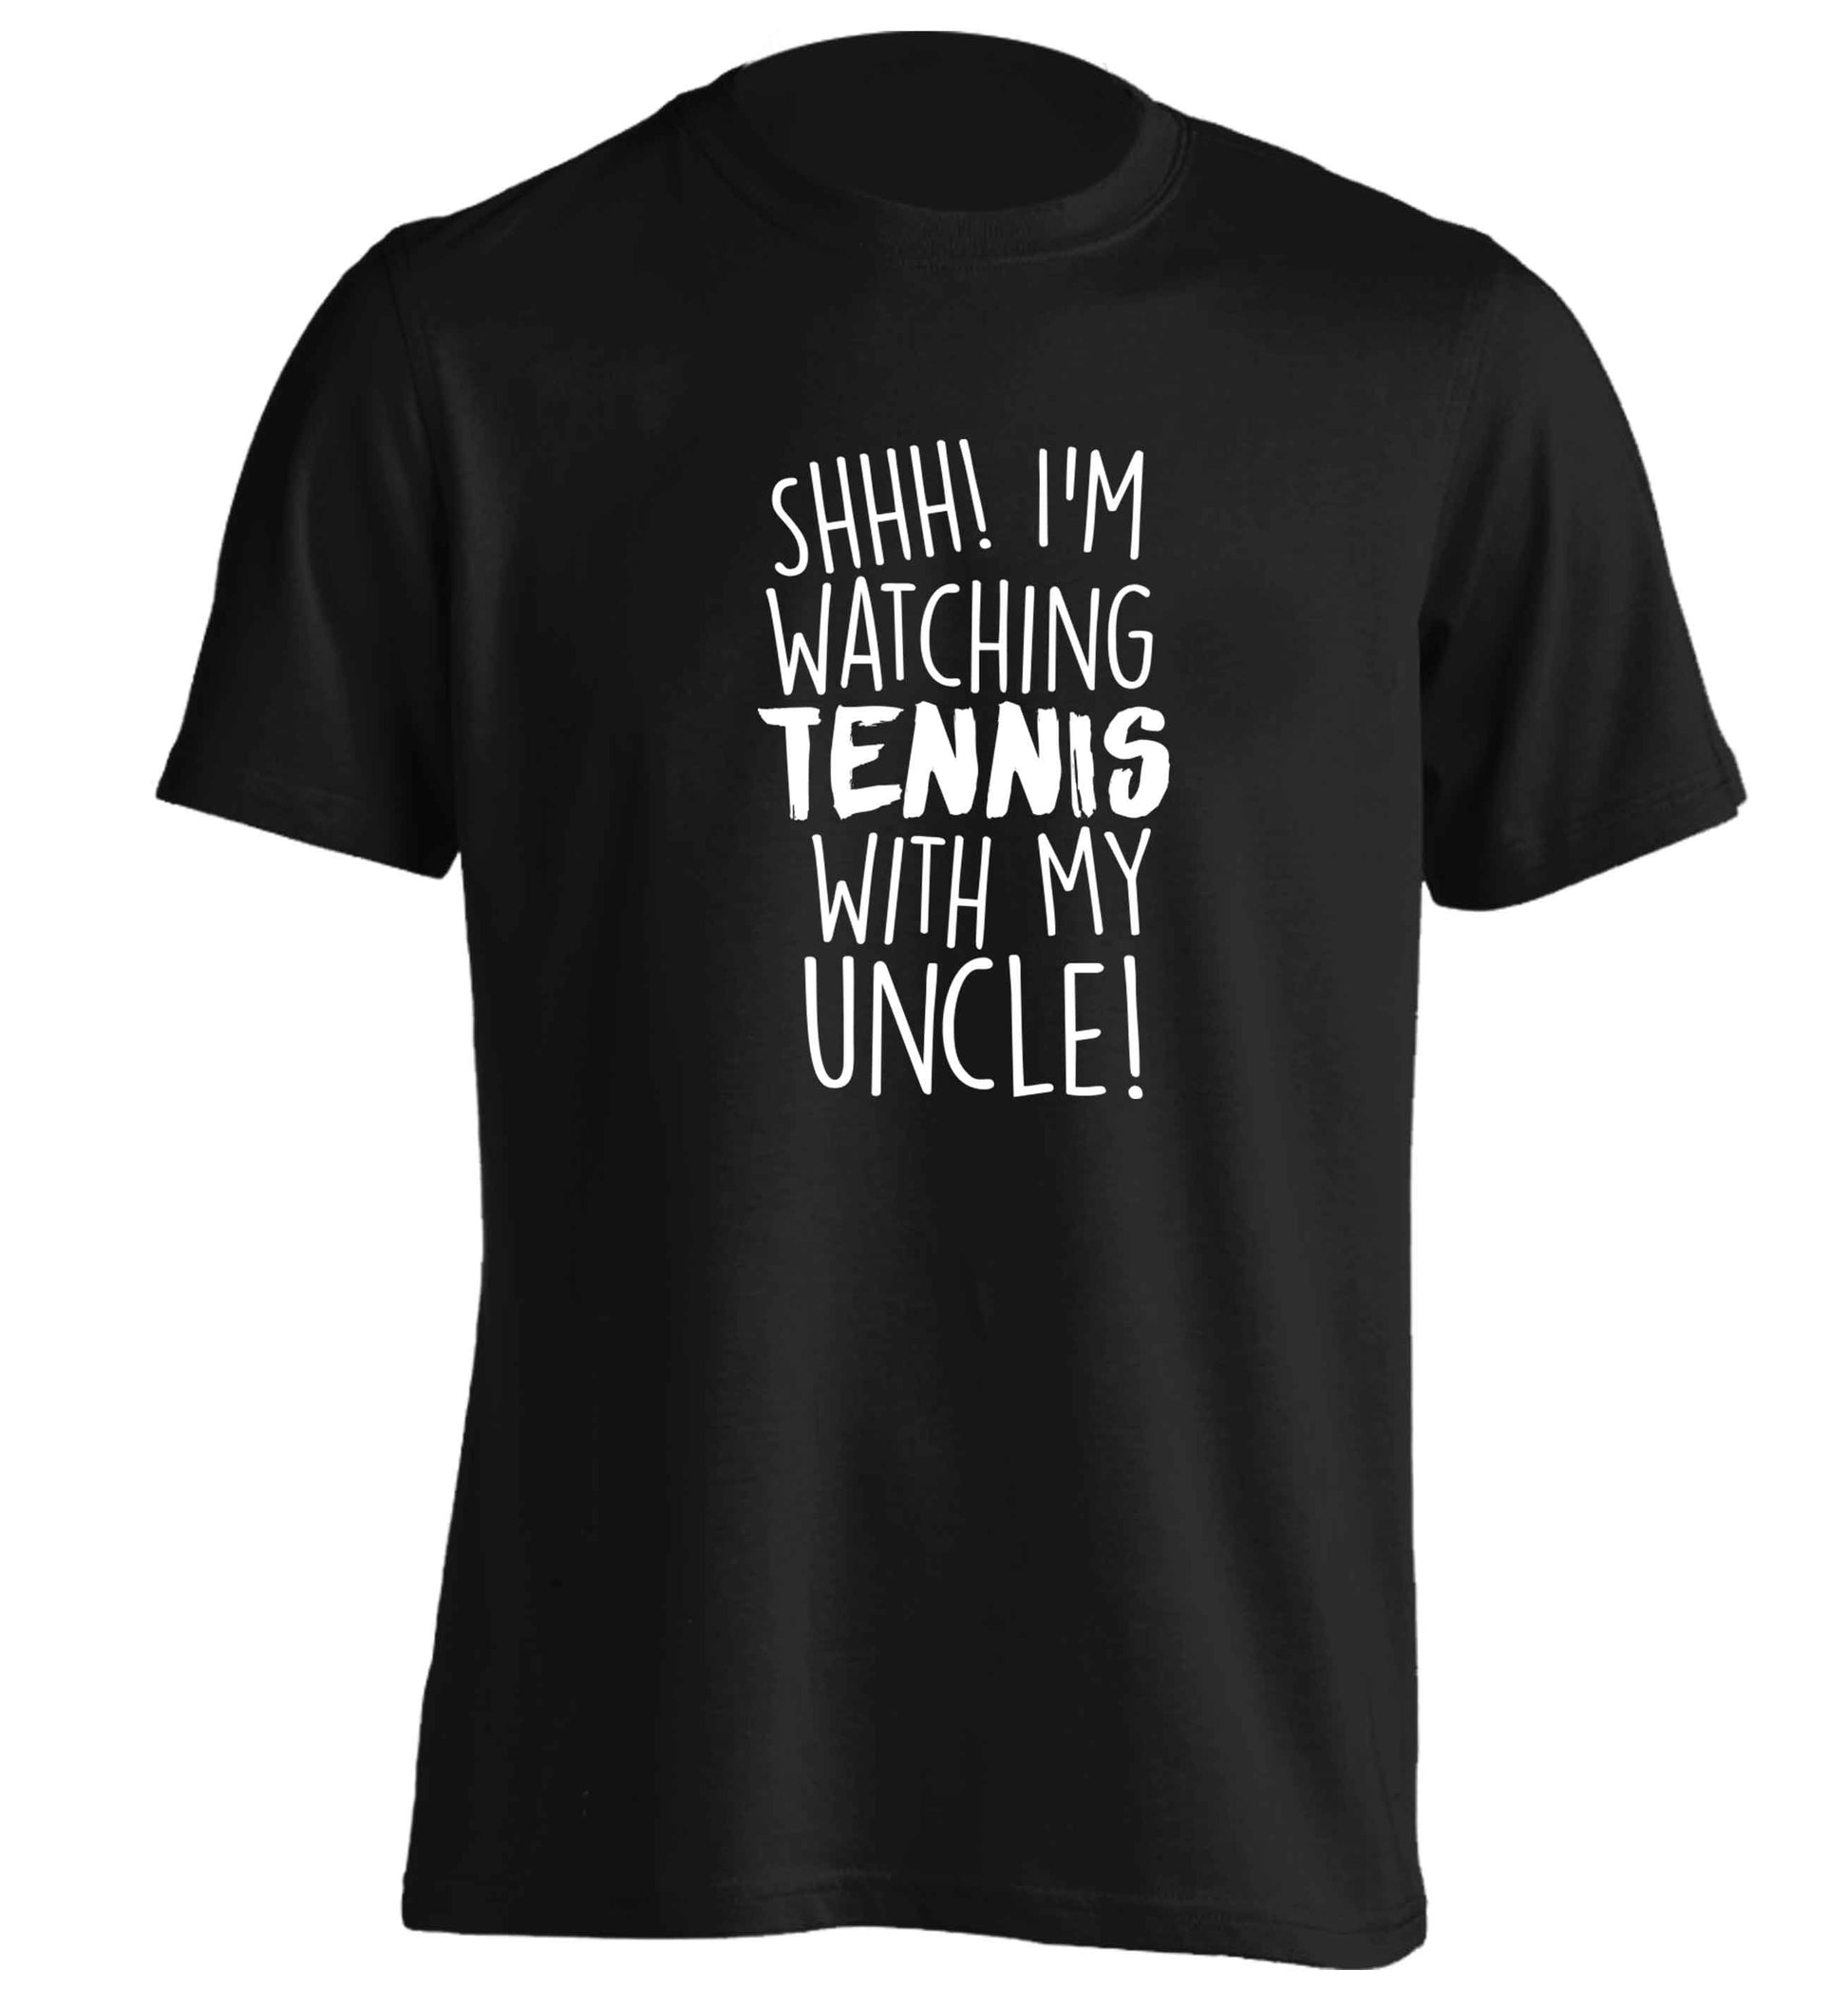 Shh! I'm watching tennis with my uncle! adults unisex black Tshirt 2XL